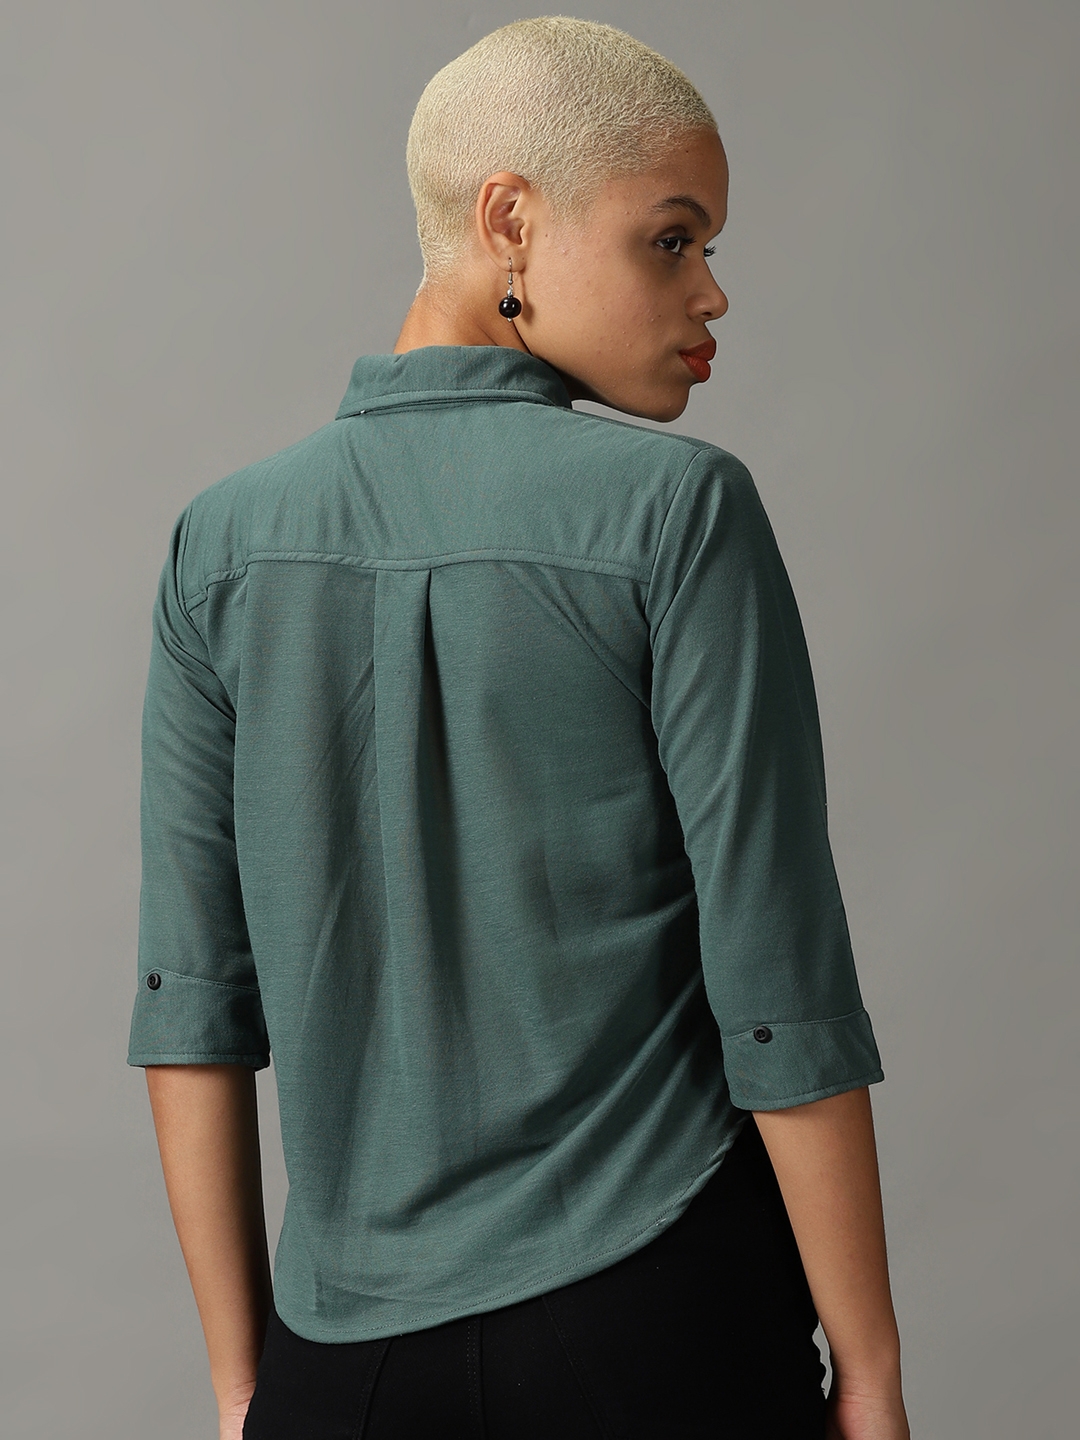 Women's Green Polyester Solid Casual Shirts